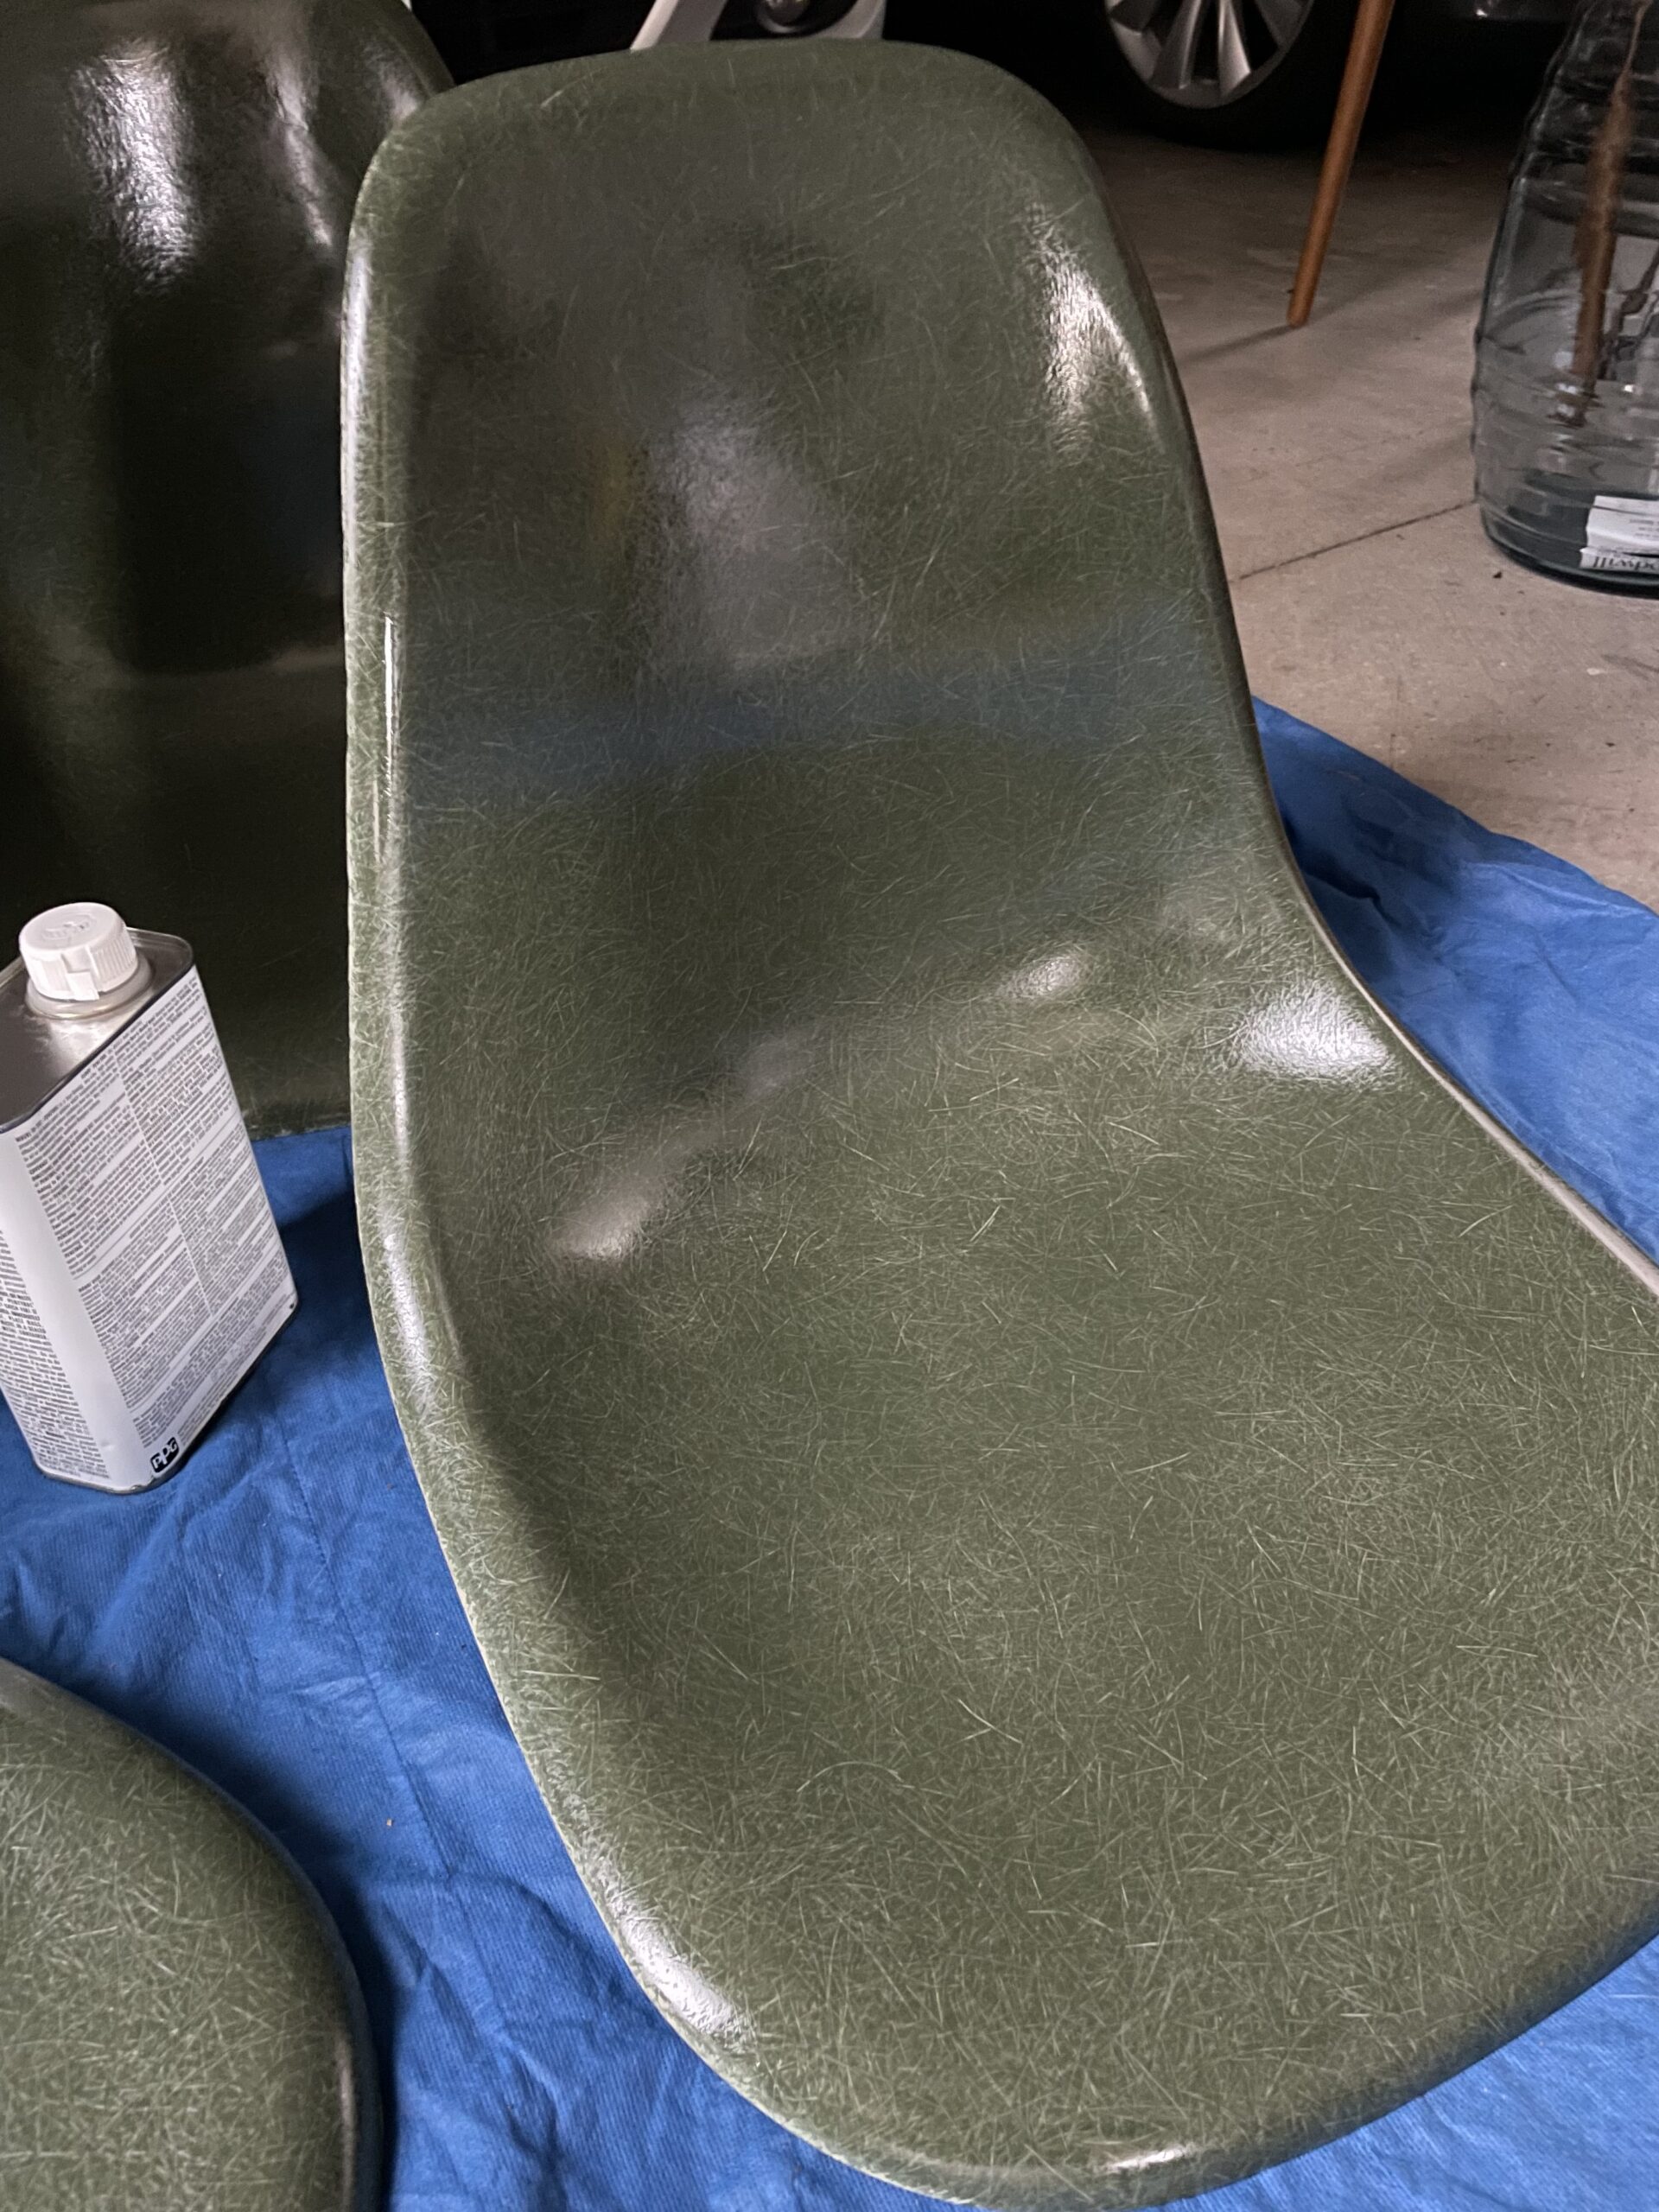 An Eames chair shined up with Penetrol